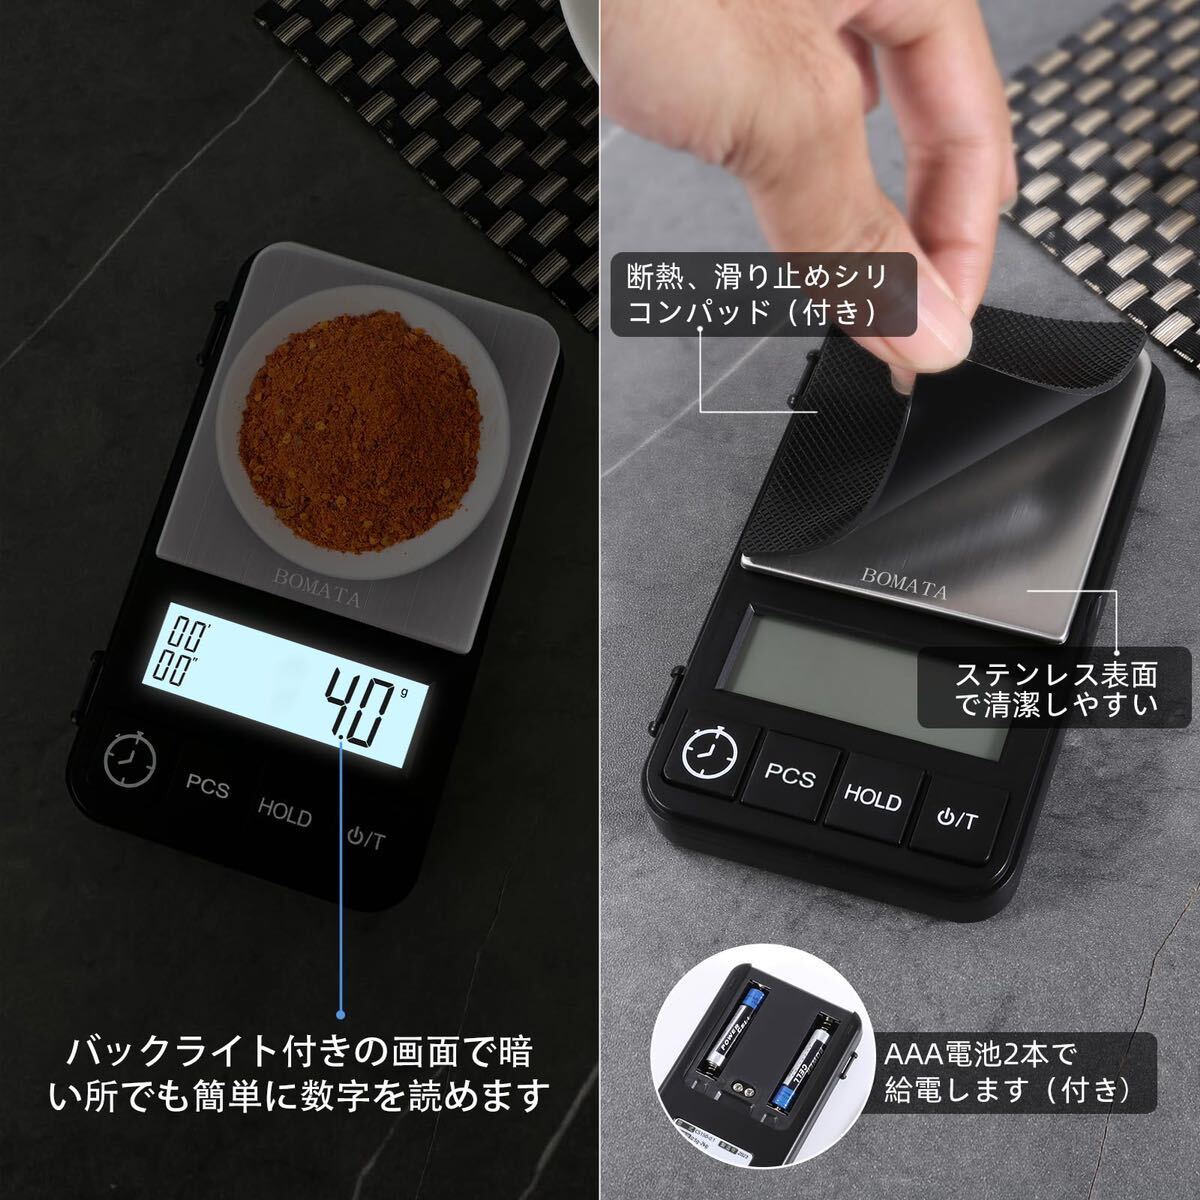 * pocket digital scale 2kg 0.1g unit small size coffee scale timer attaching portable scale 